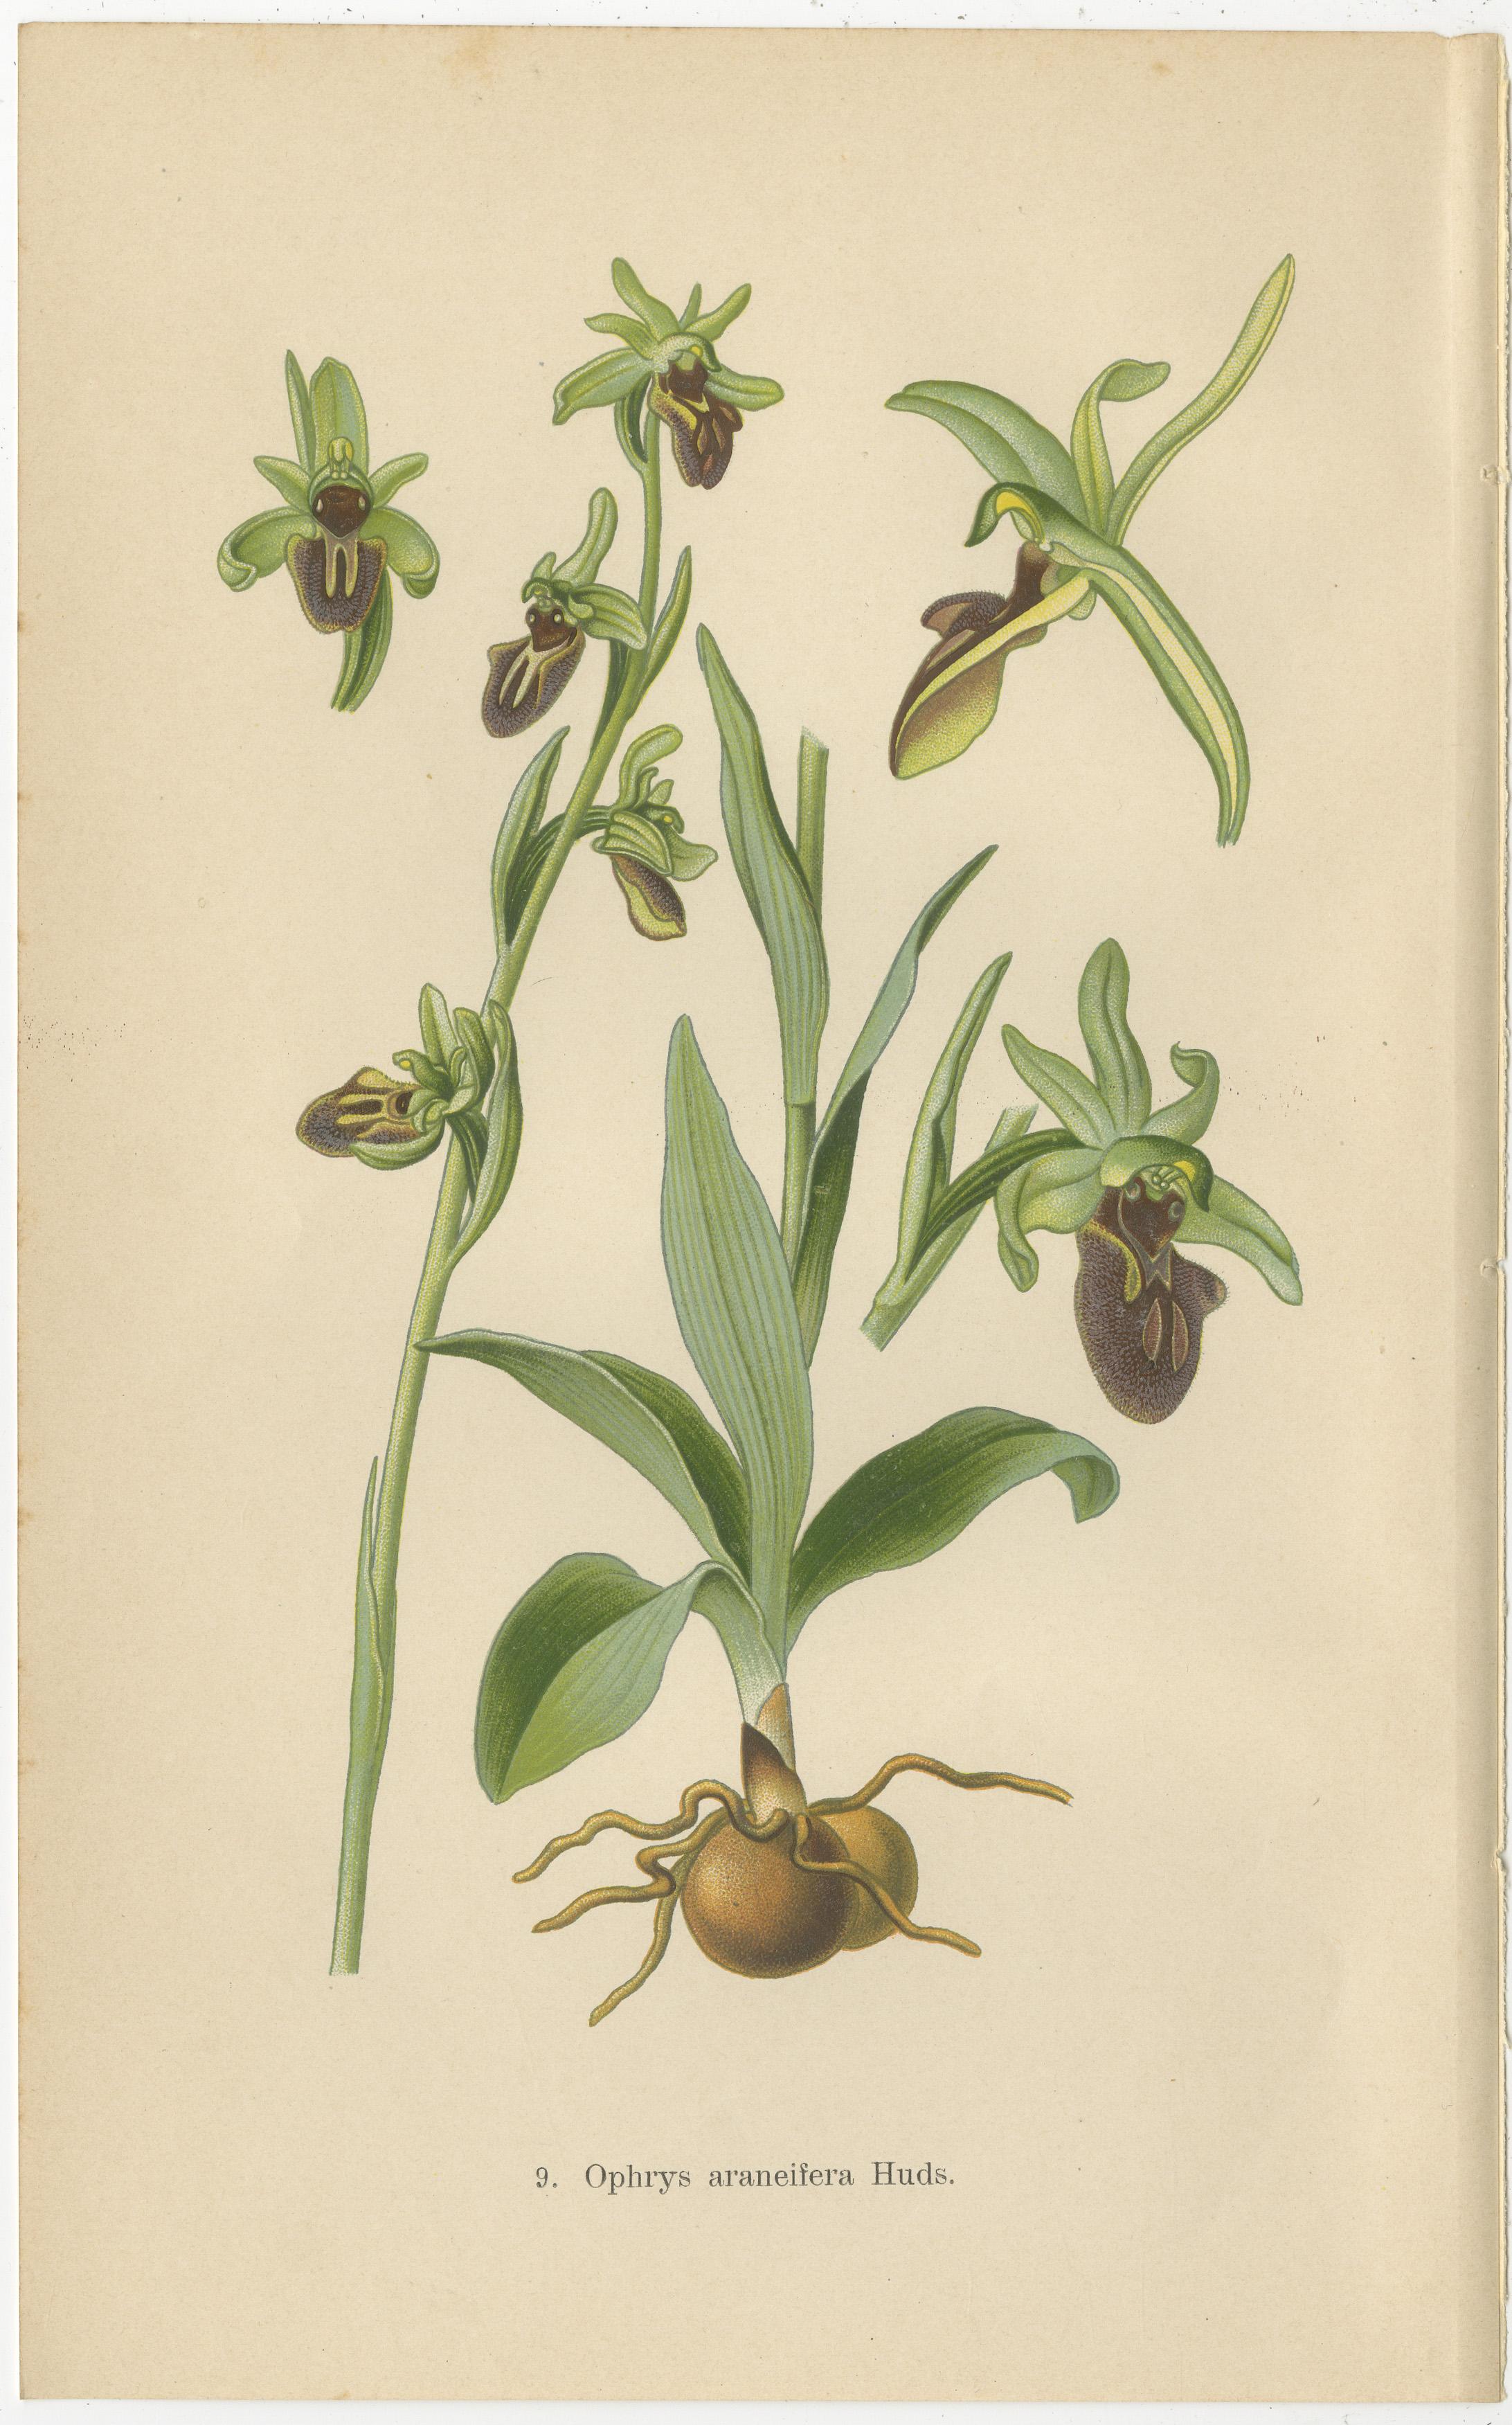 The collage presents a curated selection of Ophrys species, each meticulously illustrated to showcase the distinctive features that characterize these unique orchids. 

The first image, 